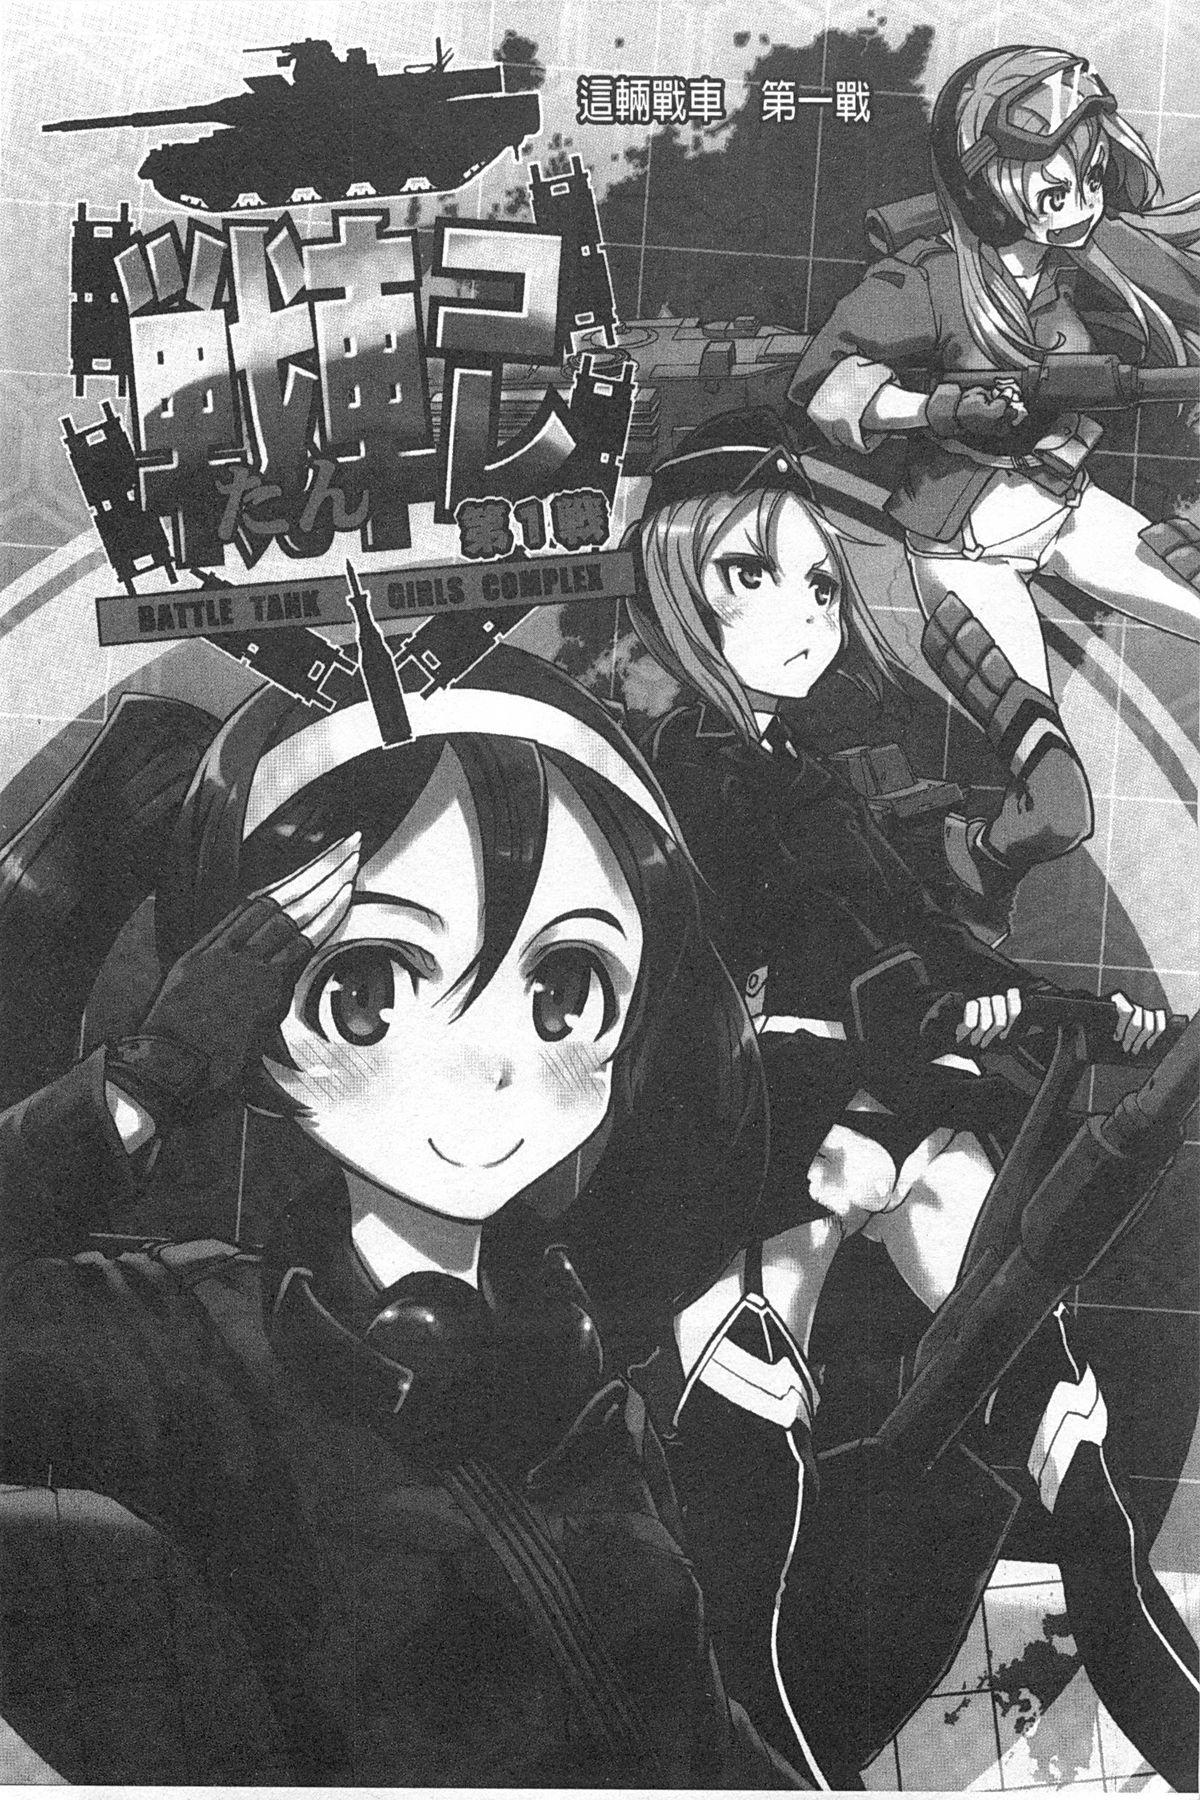 Puto Tancolle - Battle Tank Girls Complex | TAN COLLE戰車收藏 Mask - Page 6